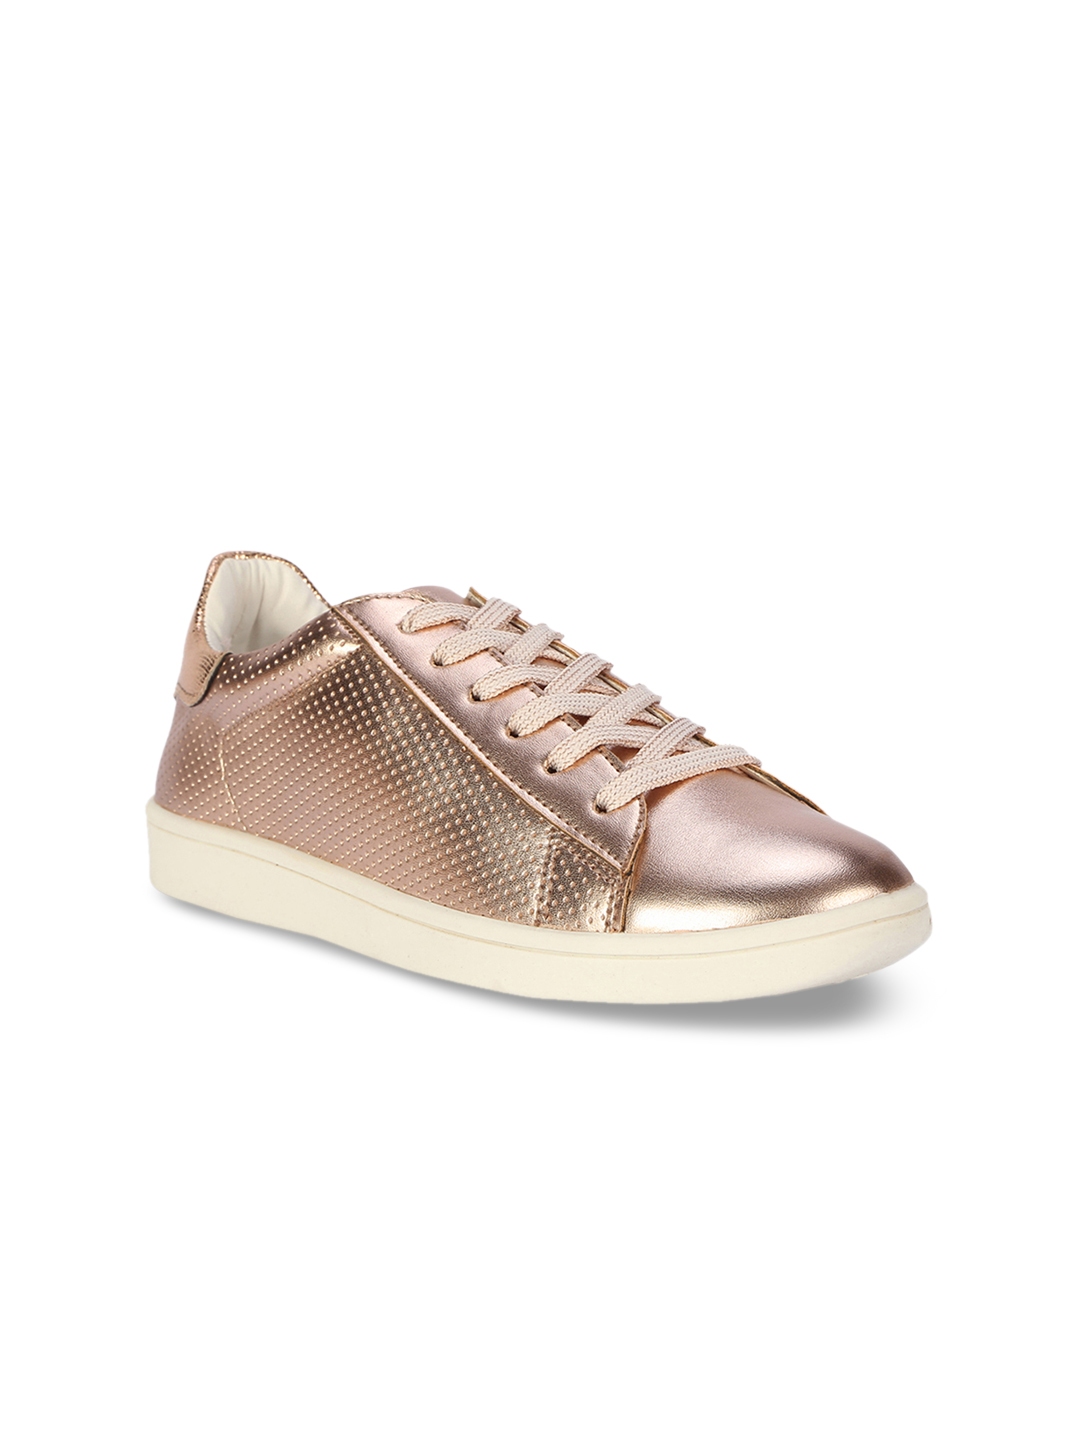 Buy People Women Copper Toned Sneakers - Casual Shoes for Women 7740498 ...